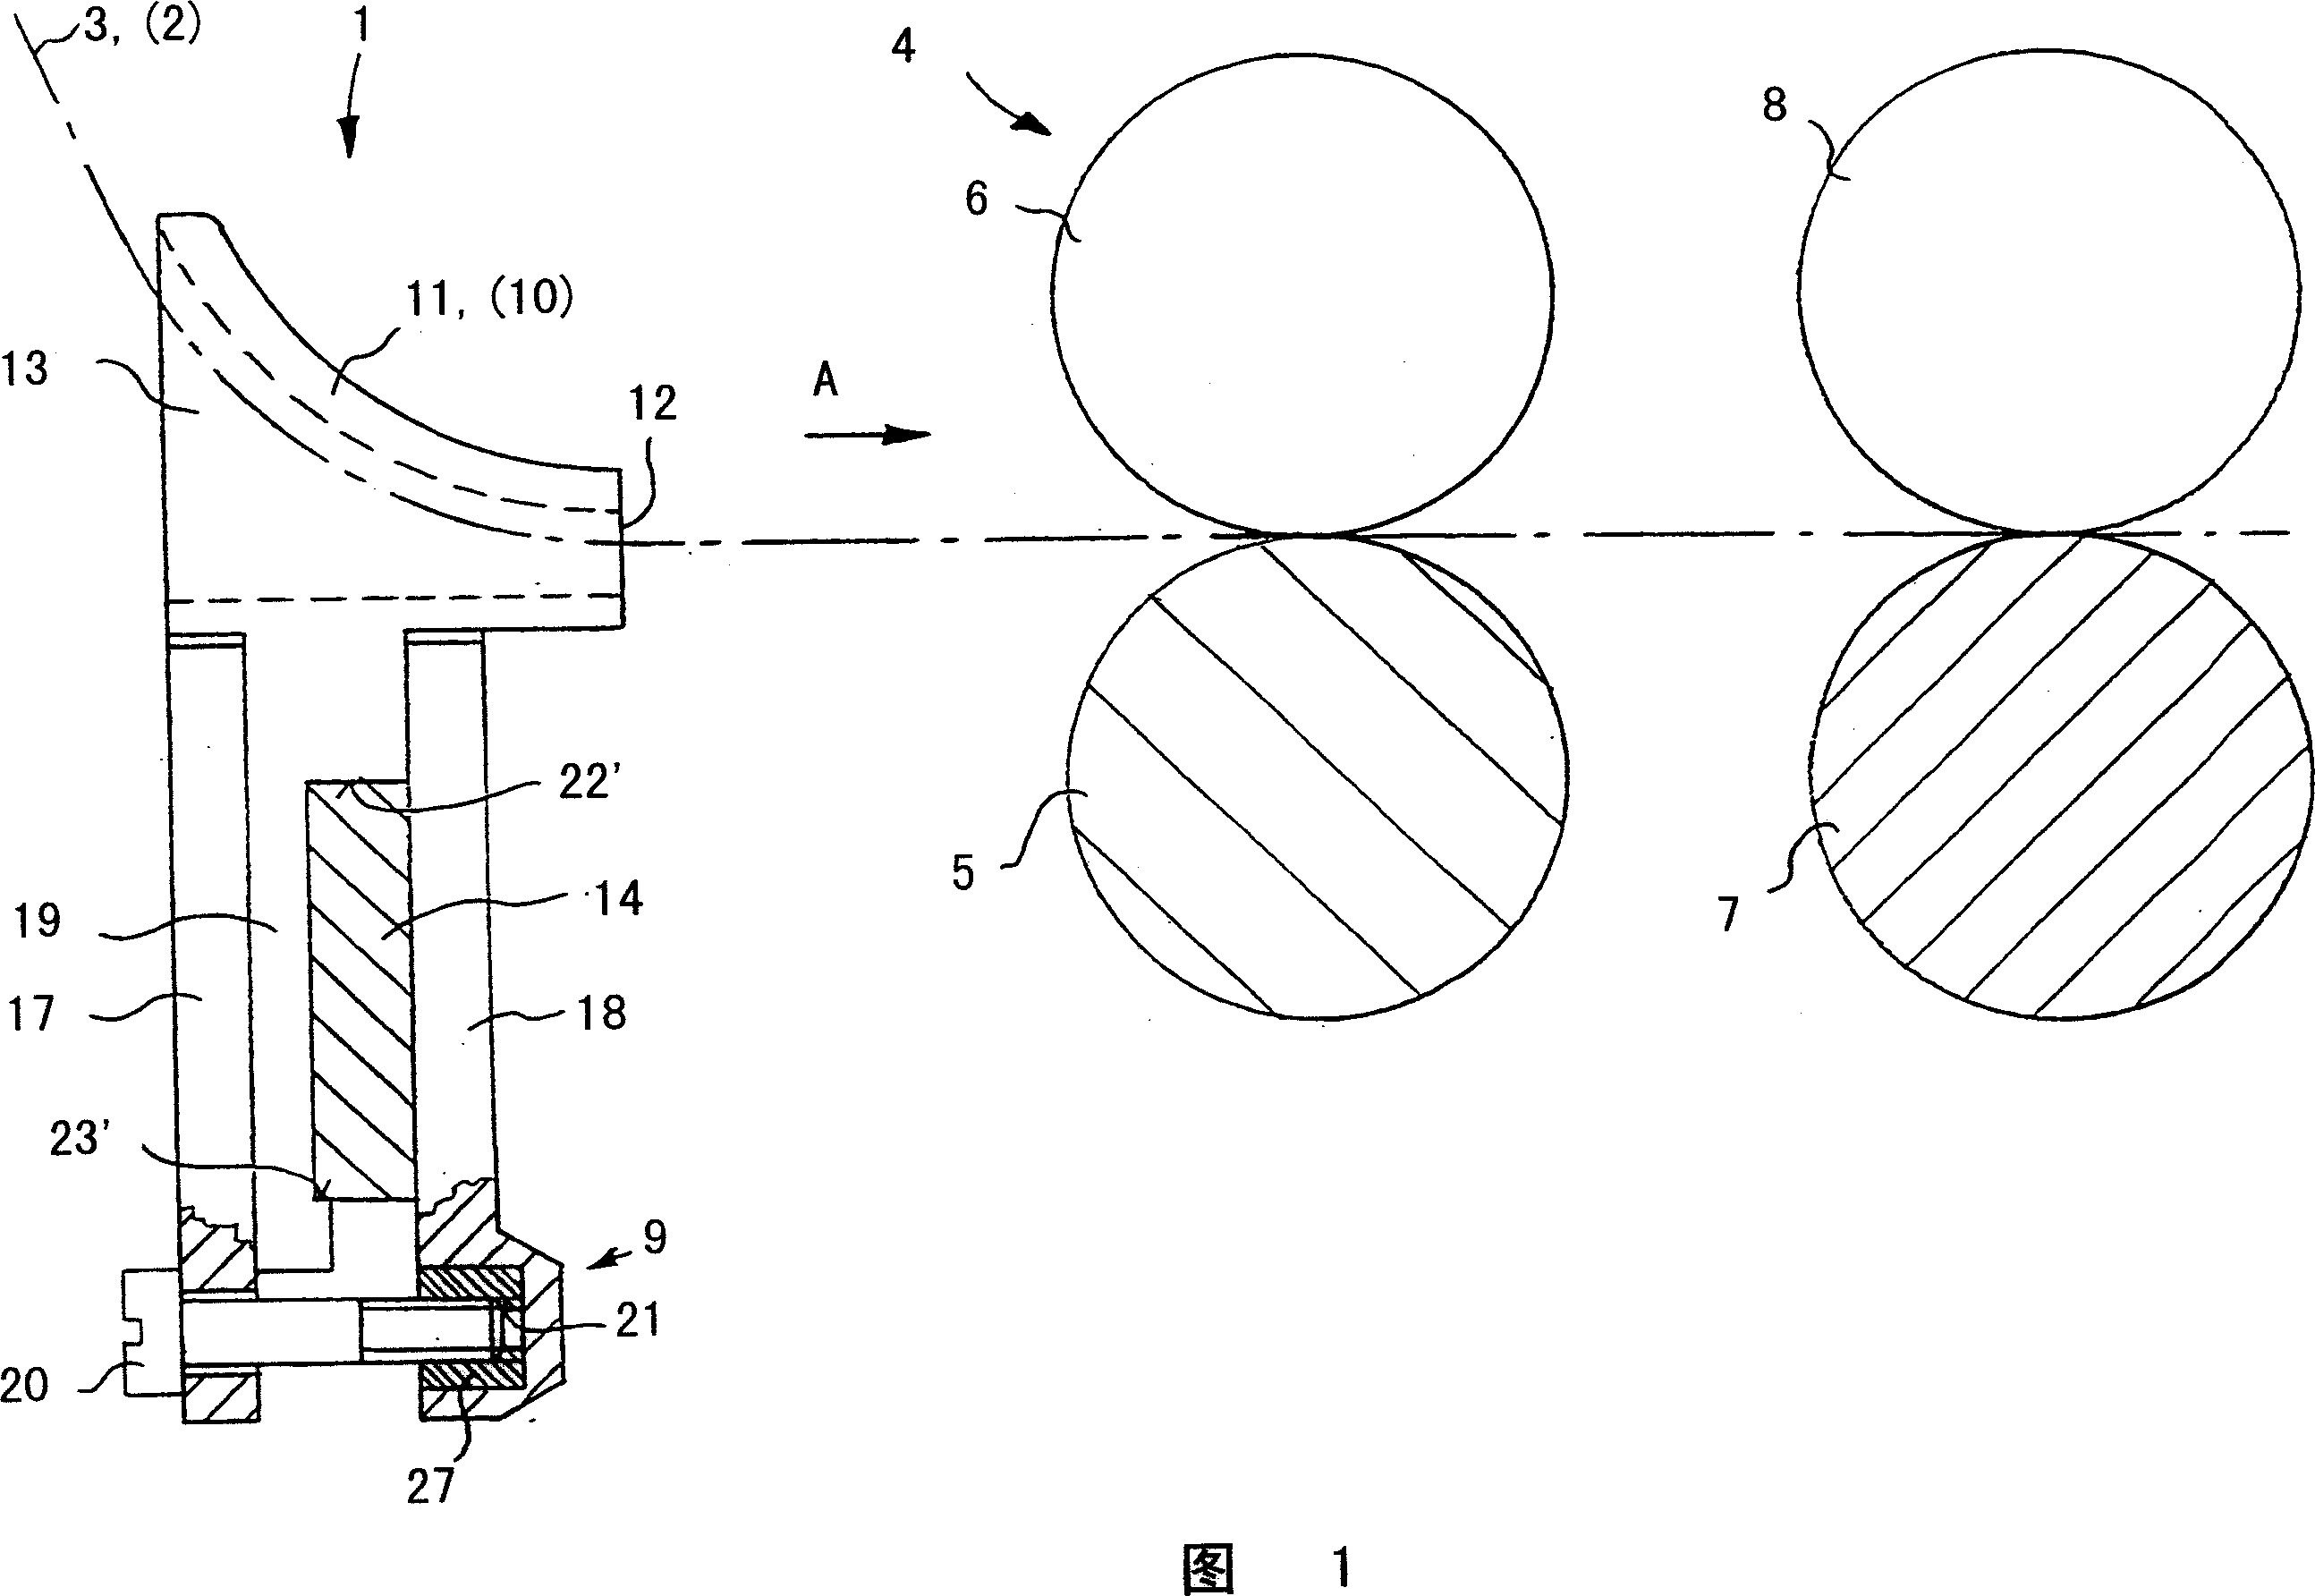 Dual-roving yarn guide for drafting device of weaving machine